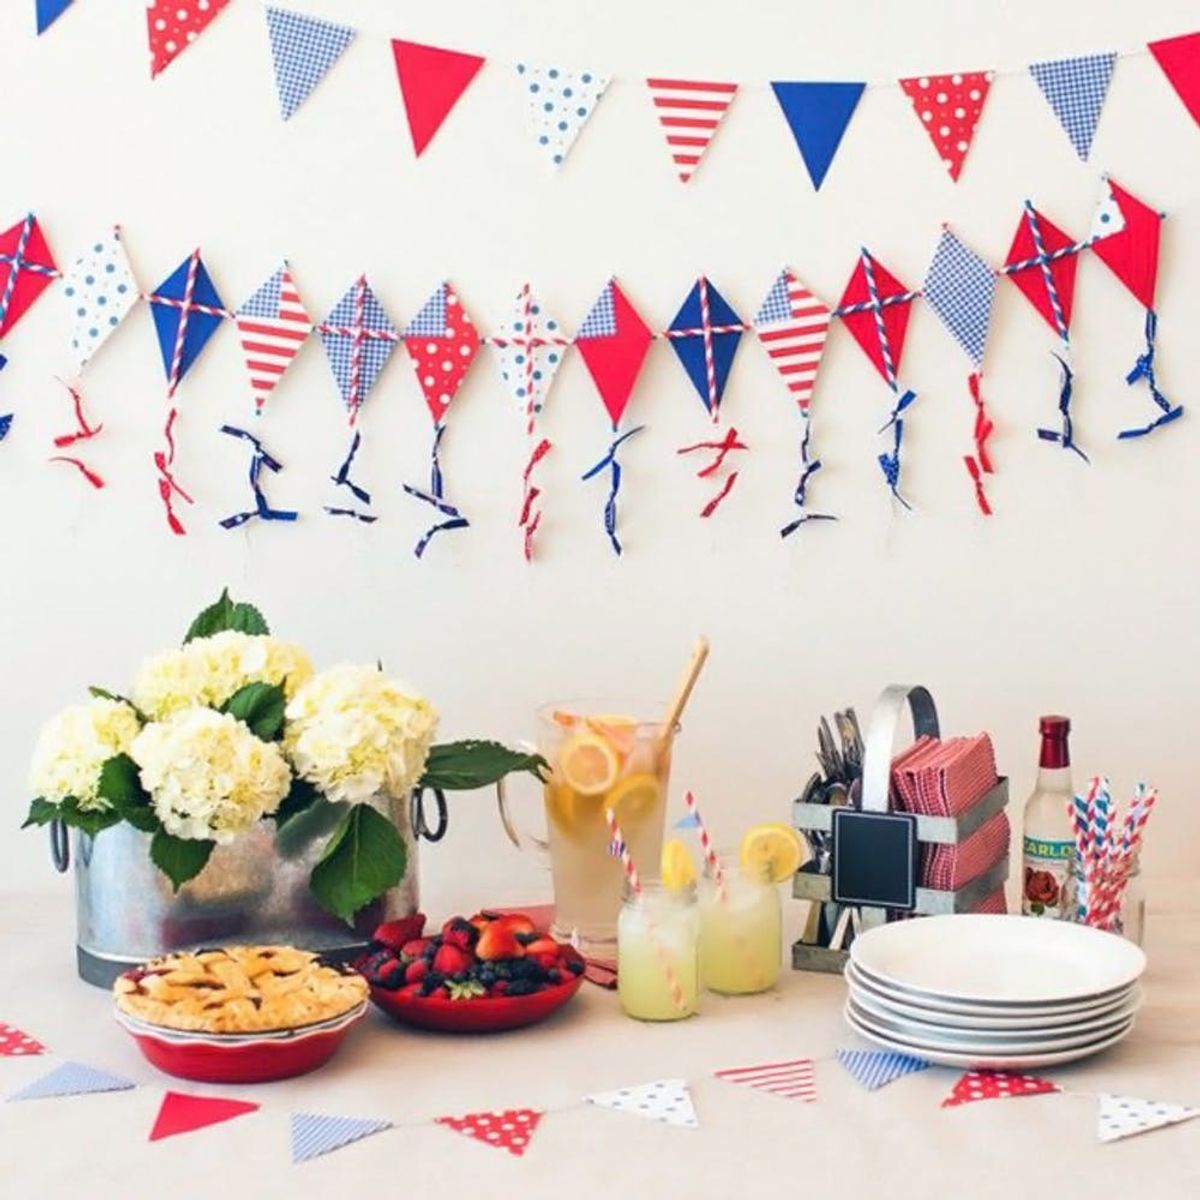 17 Ways to Make Decorating for July 4th a Blast